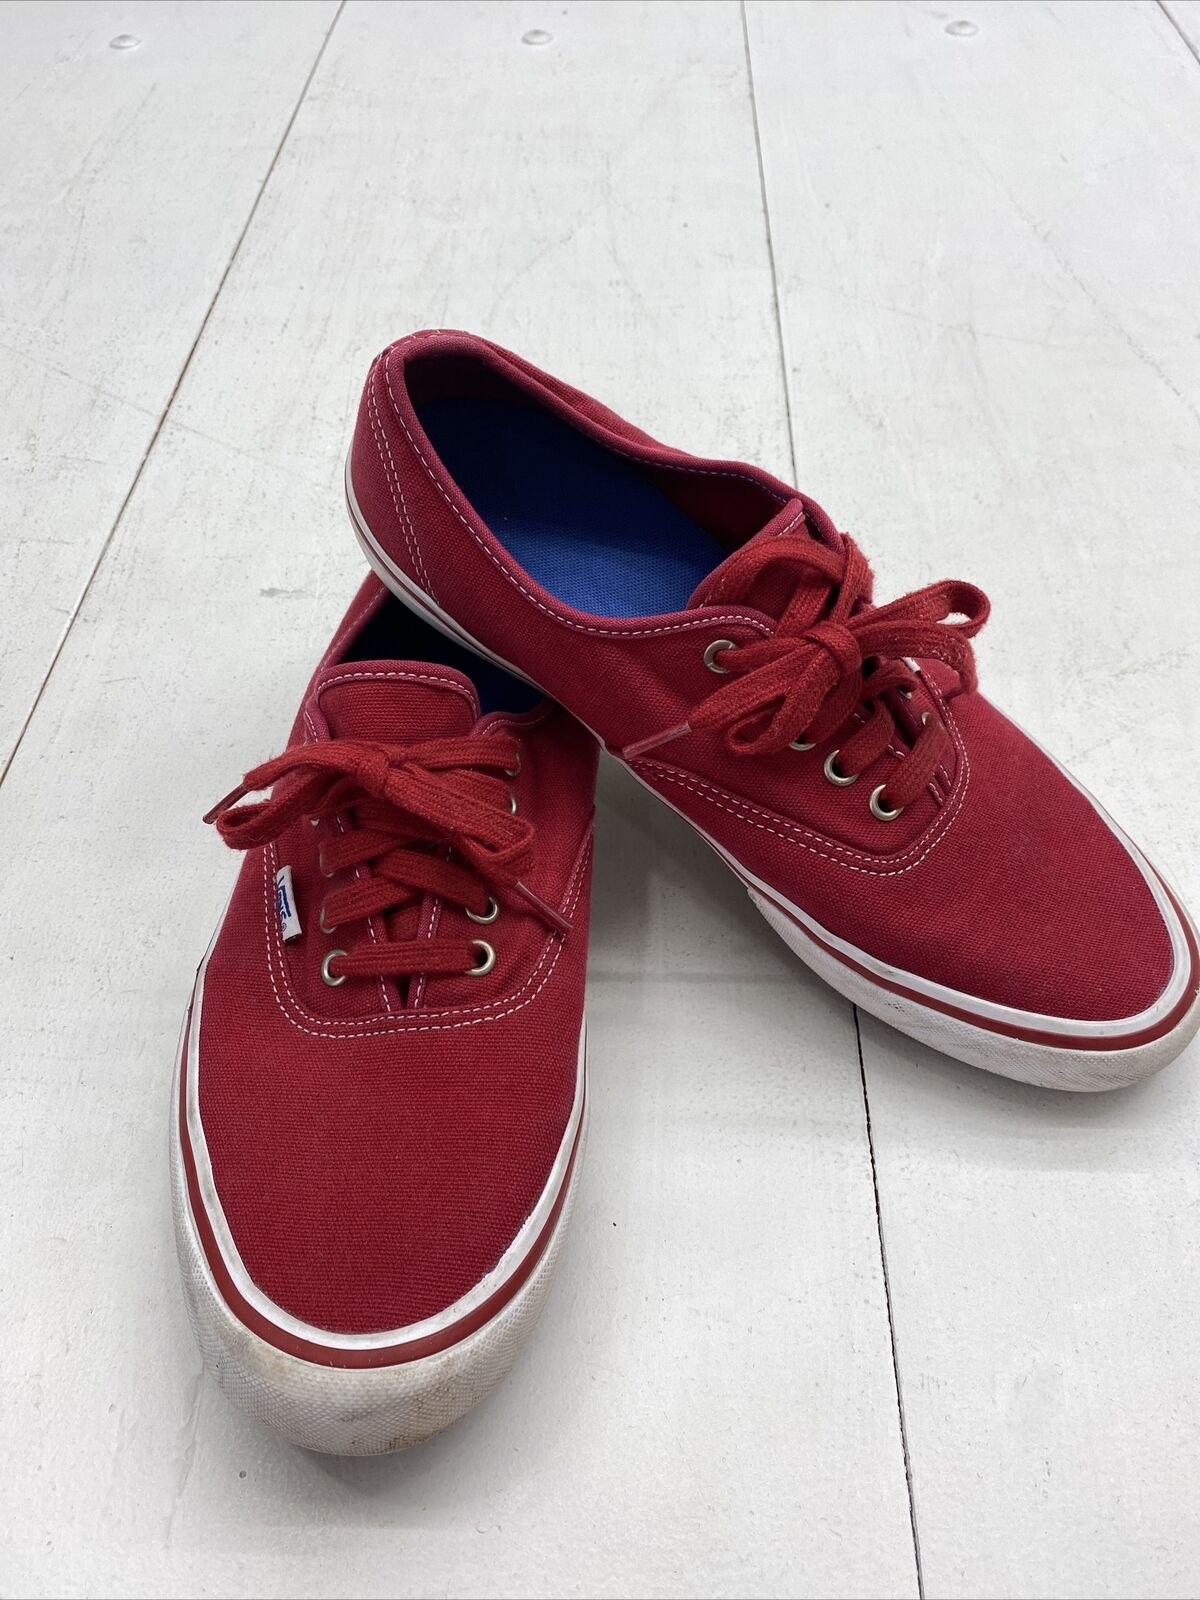 VANS 721454 RED ULTRA CUSHION SKATEBOARD PRO SHOES MENS SIZE 11